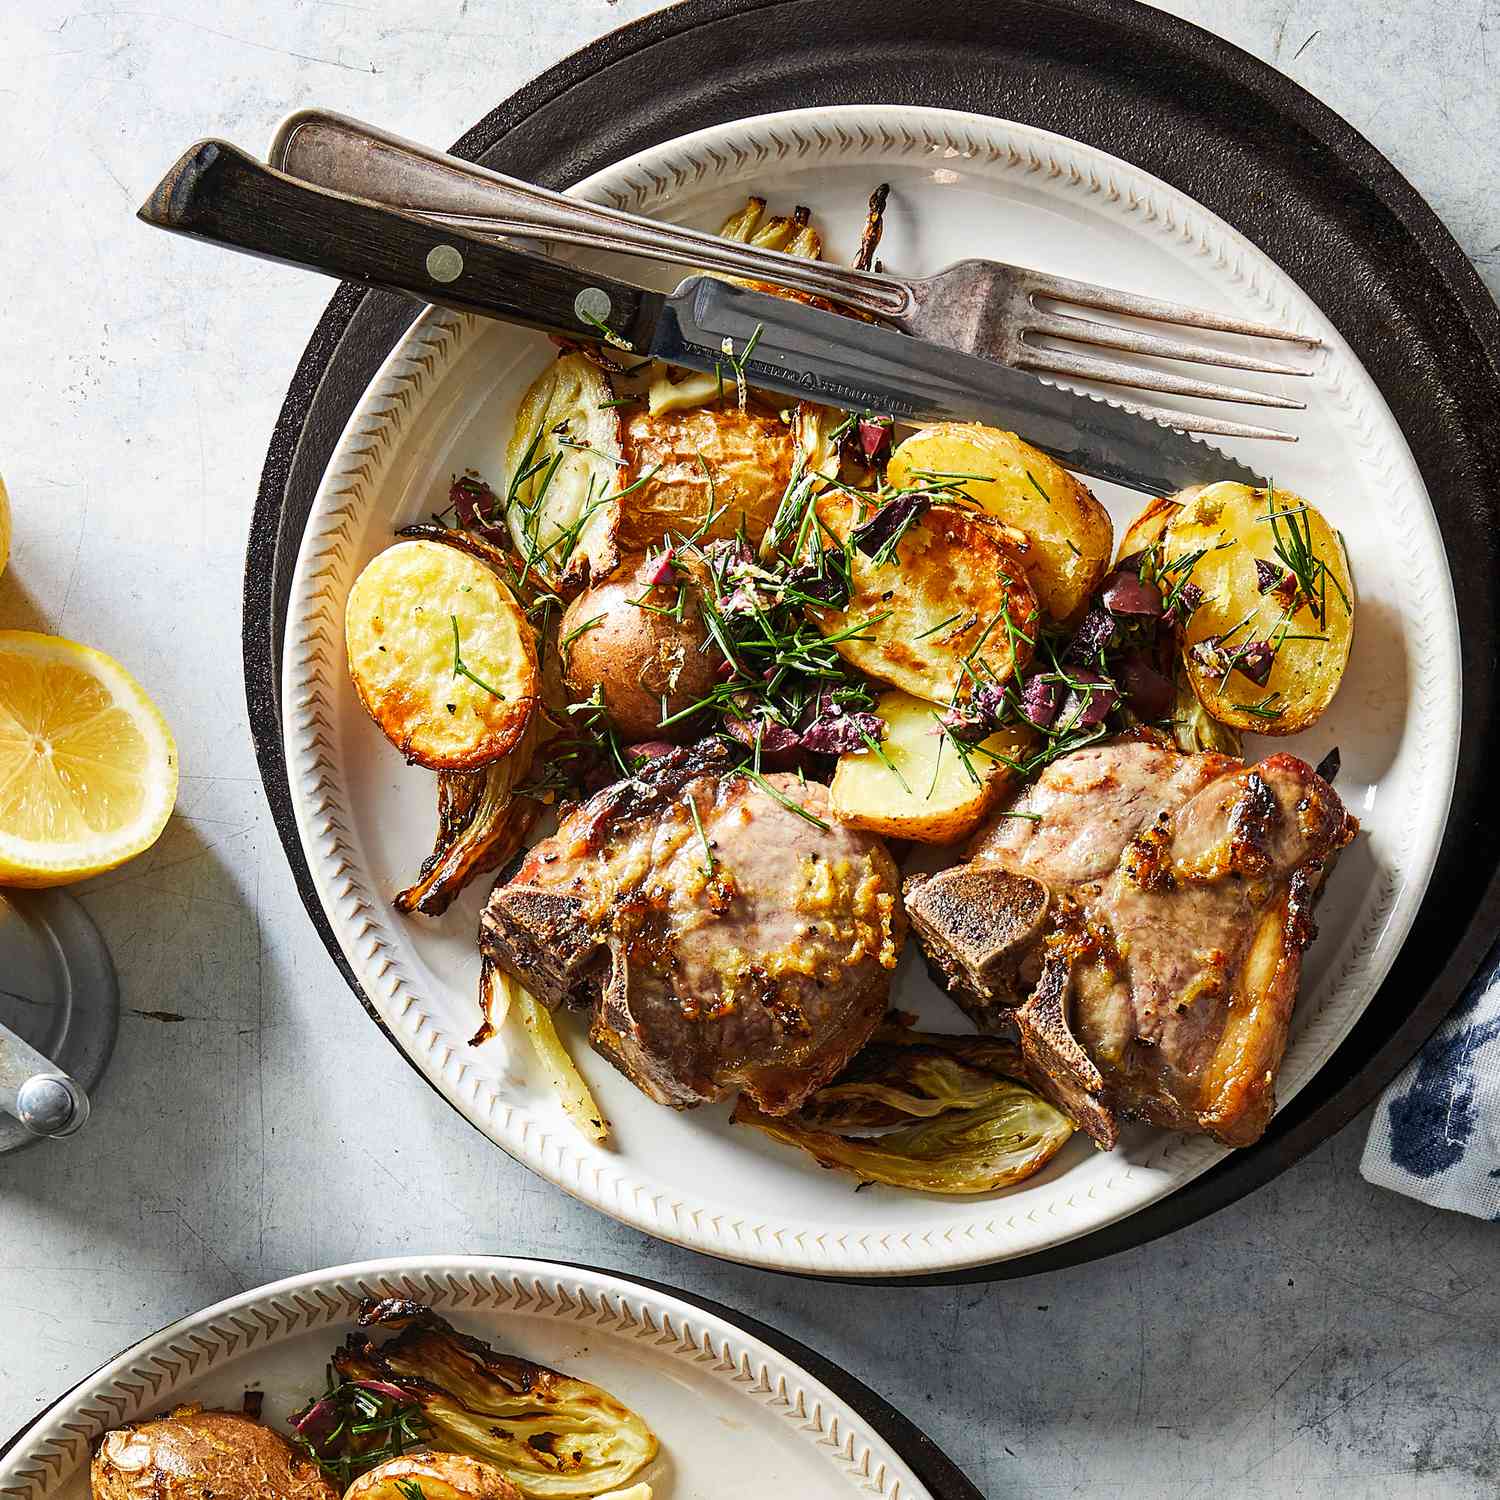 a recipe photo of the Air-Fryer Lemony Lamb Chops with Fennel & Olives served on plates